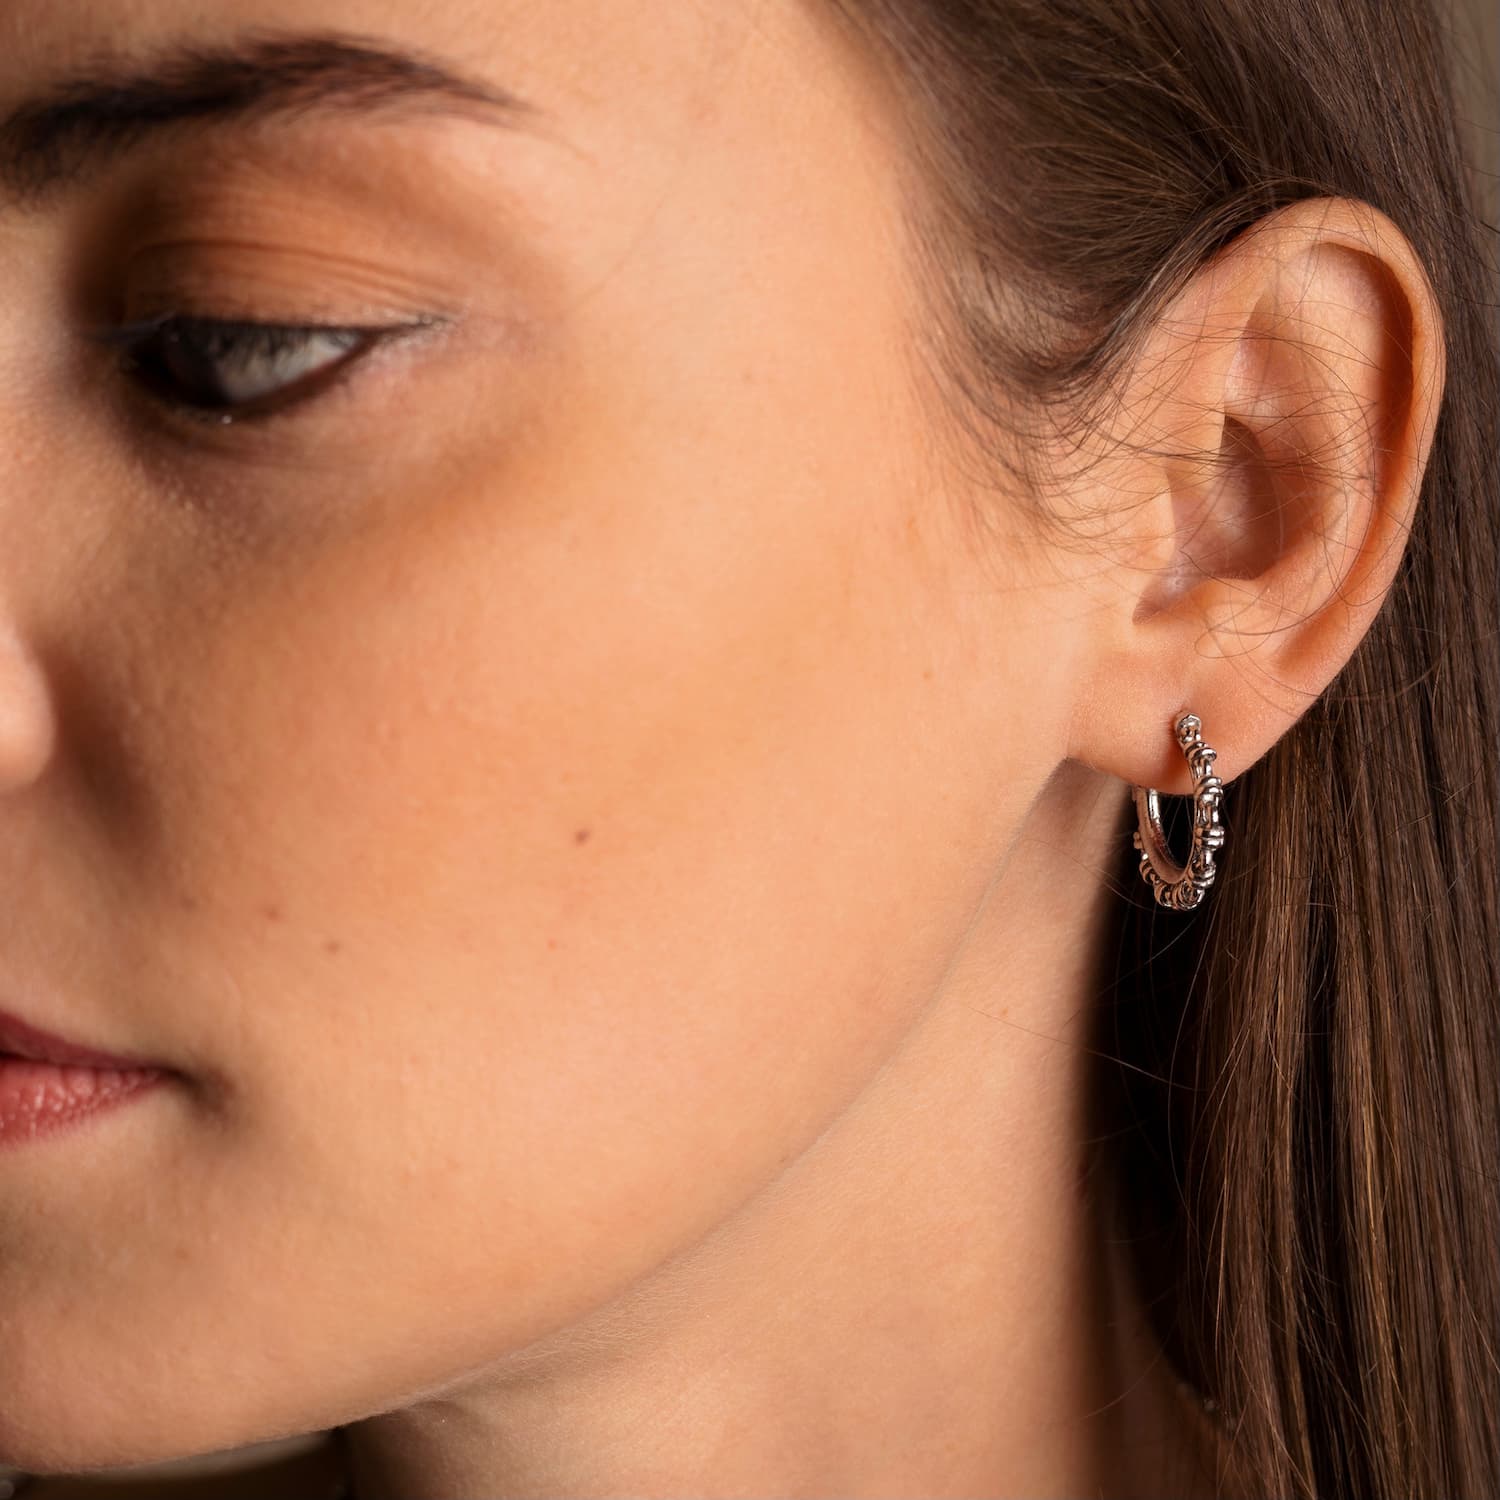 A closeup of a model wearing silver hoop earrings designed and hand-crafted by DelBrenna Italian Jewelers in Tuscany. The earrings are designed based on the iconic Links collection of DelBrenna silver chains, necklaces, rings, and bracelets. 